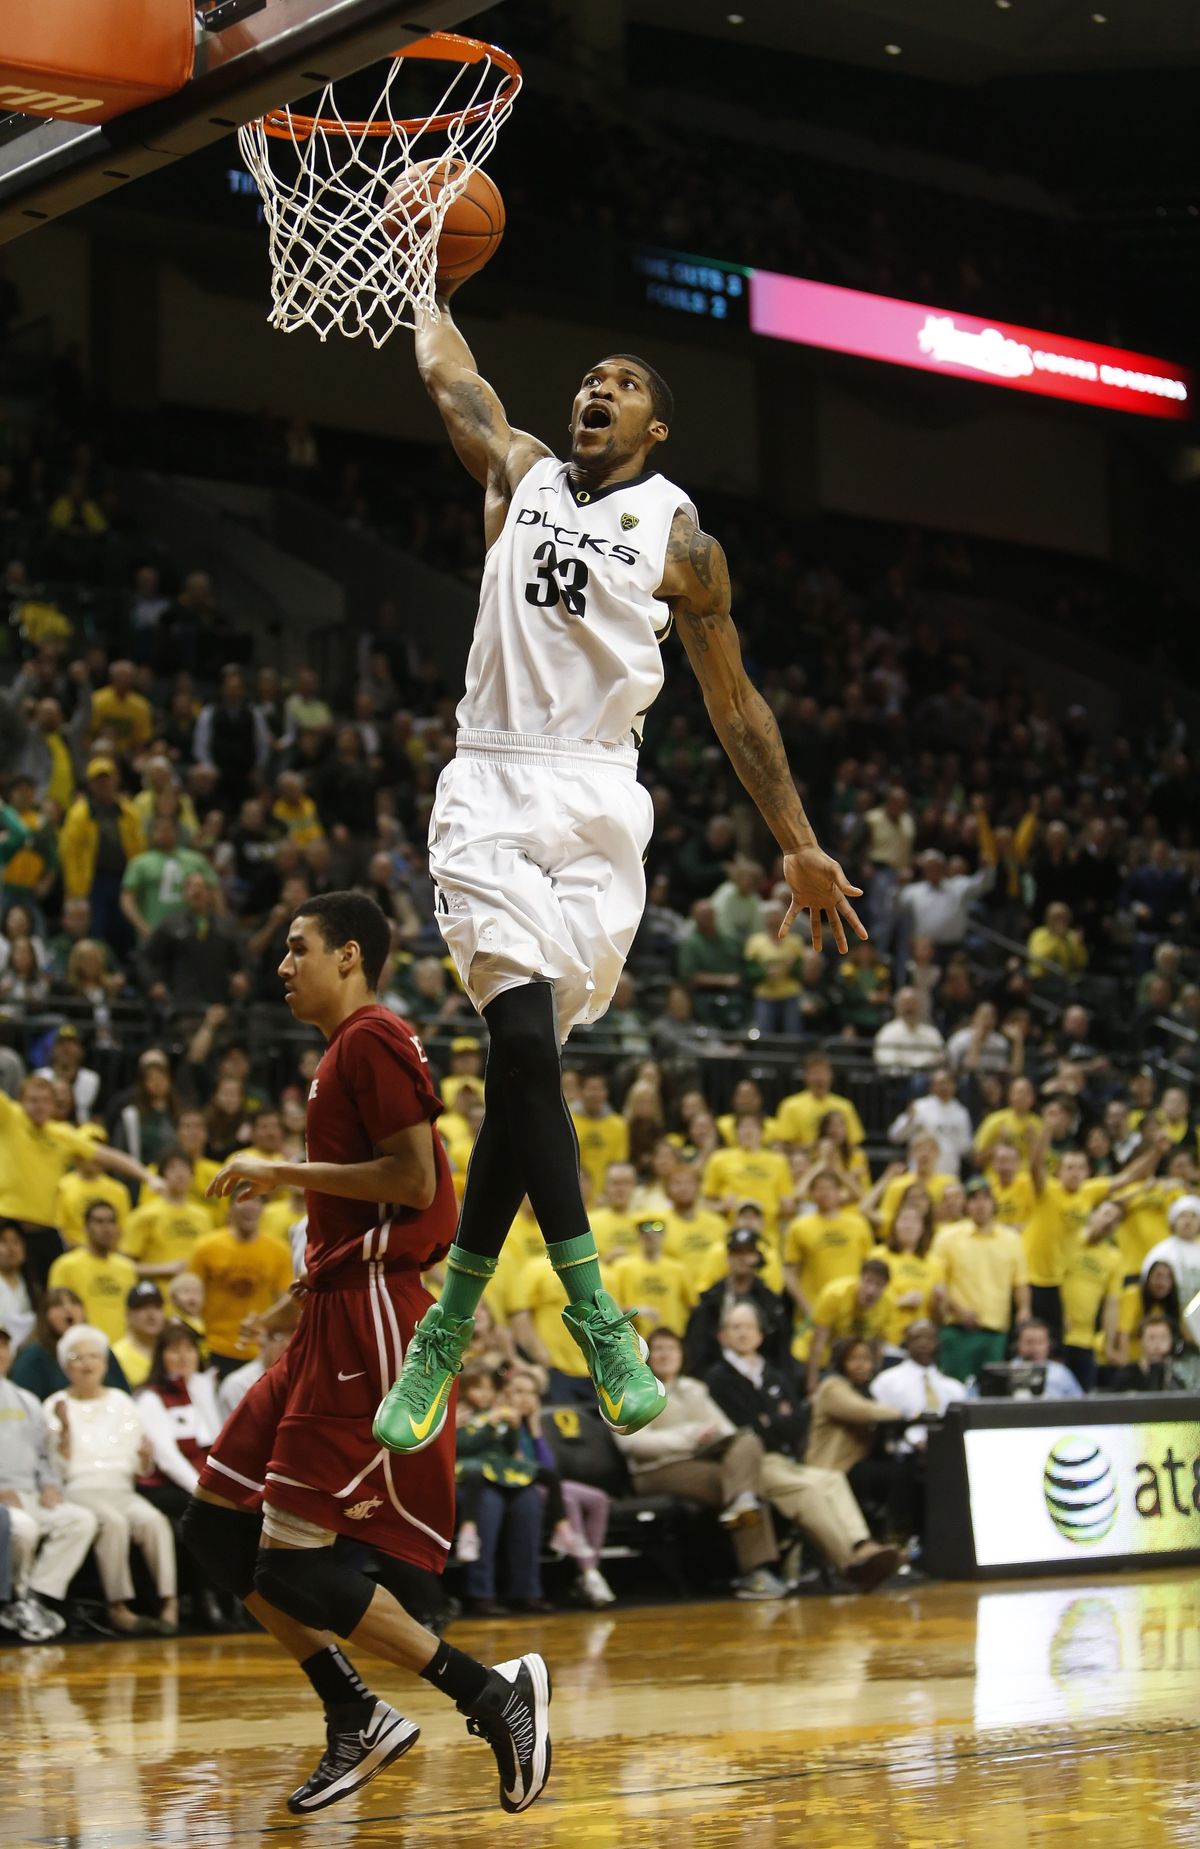 Oregon’s Carlos Emory dunks after a turnover. (Associated Press)